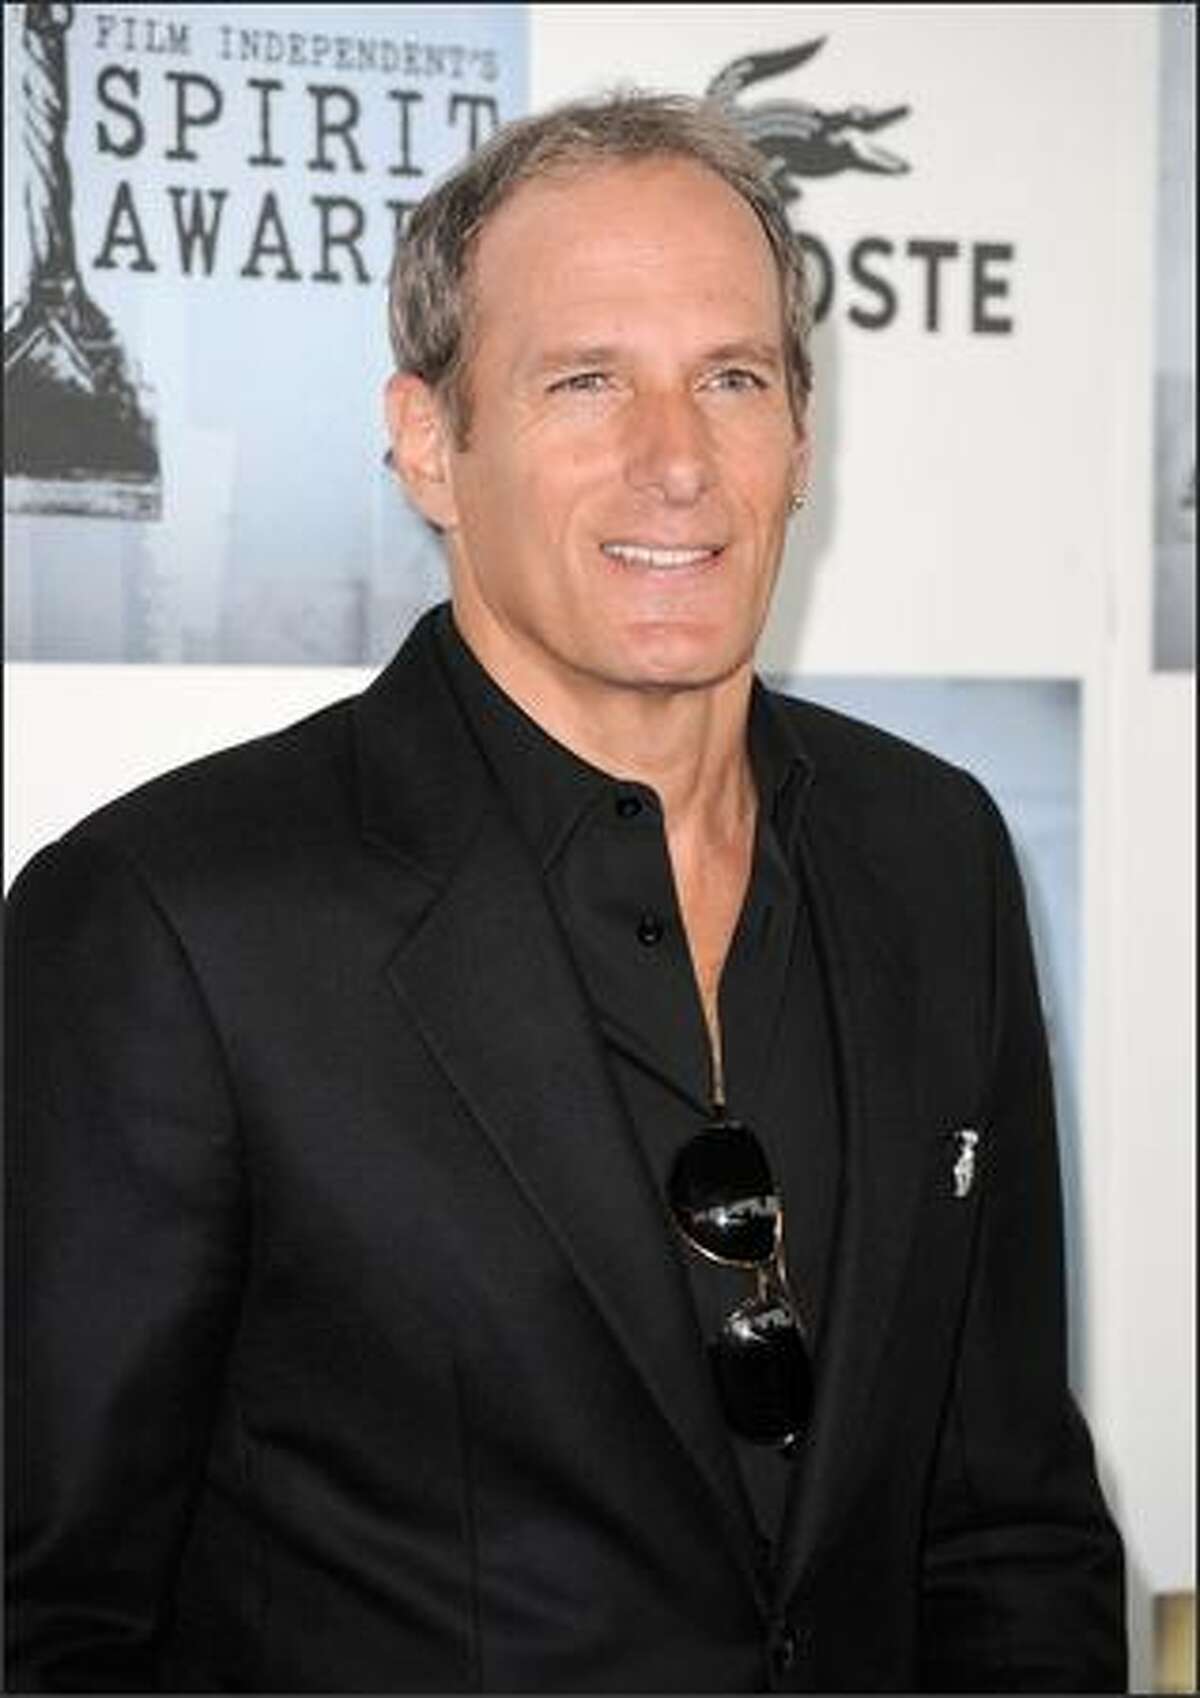 Musician Michael Bolton arrives at the 24th annual Independent Spirit Awards held at Santa Monica Beach in Santa Monica, Calif., on Saturday, Feb. 21, 2009. The awards celebrate the best idependent film offerings of the past year.